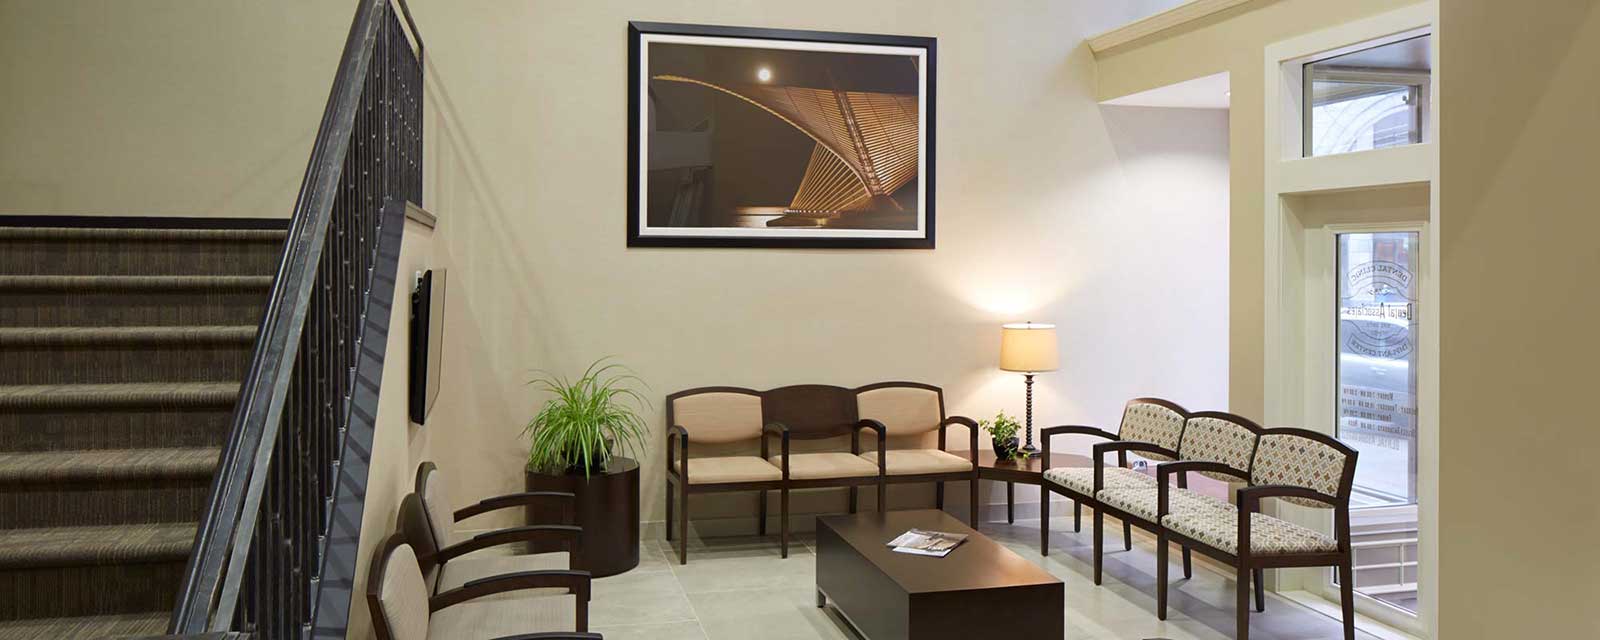 Dental Associates Downtown Milwaukee is located in the heart of the city and offers a wide range of dental services.